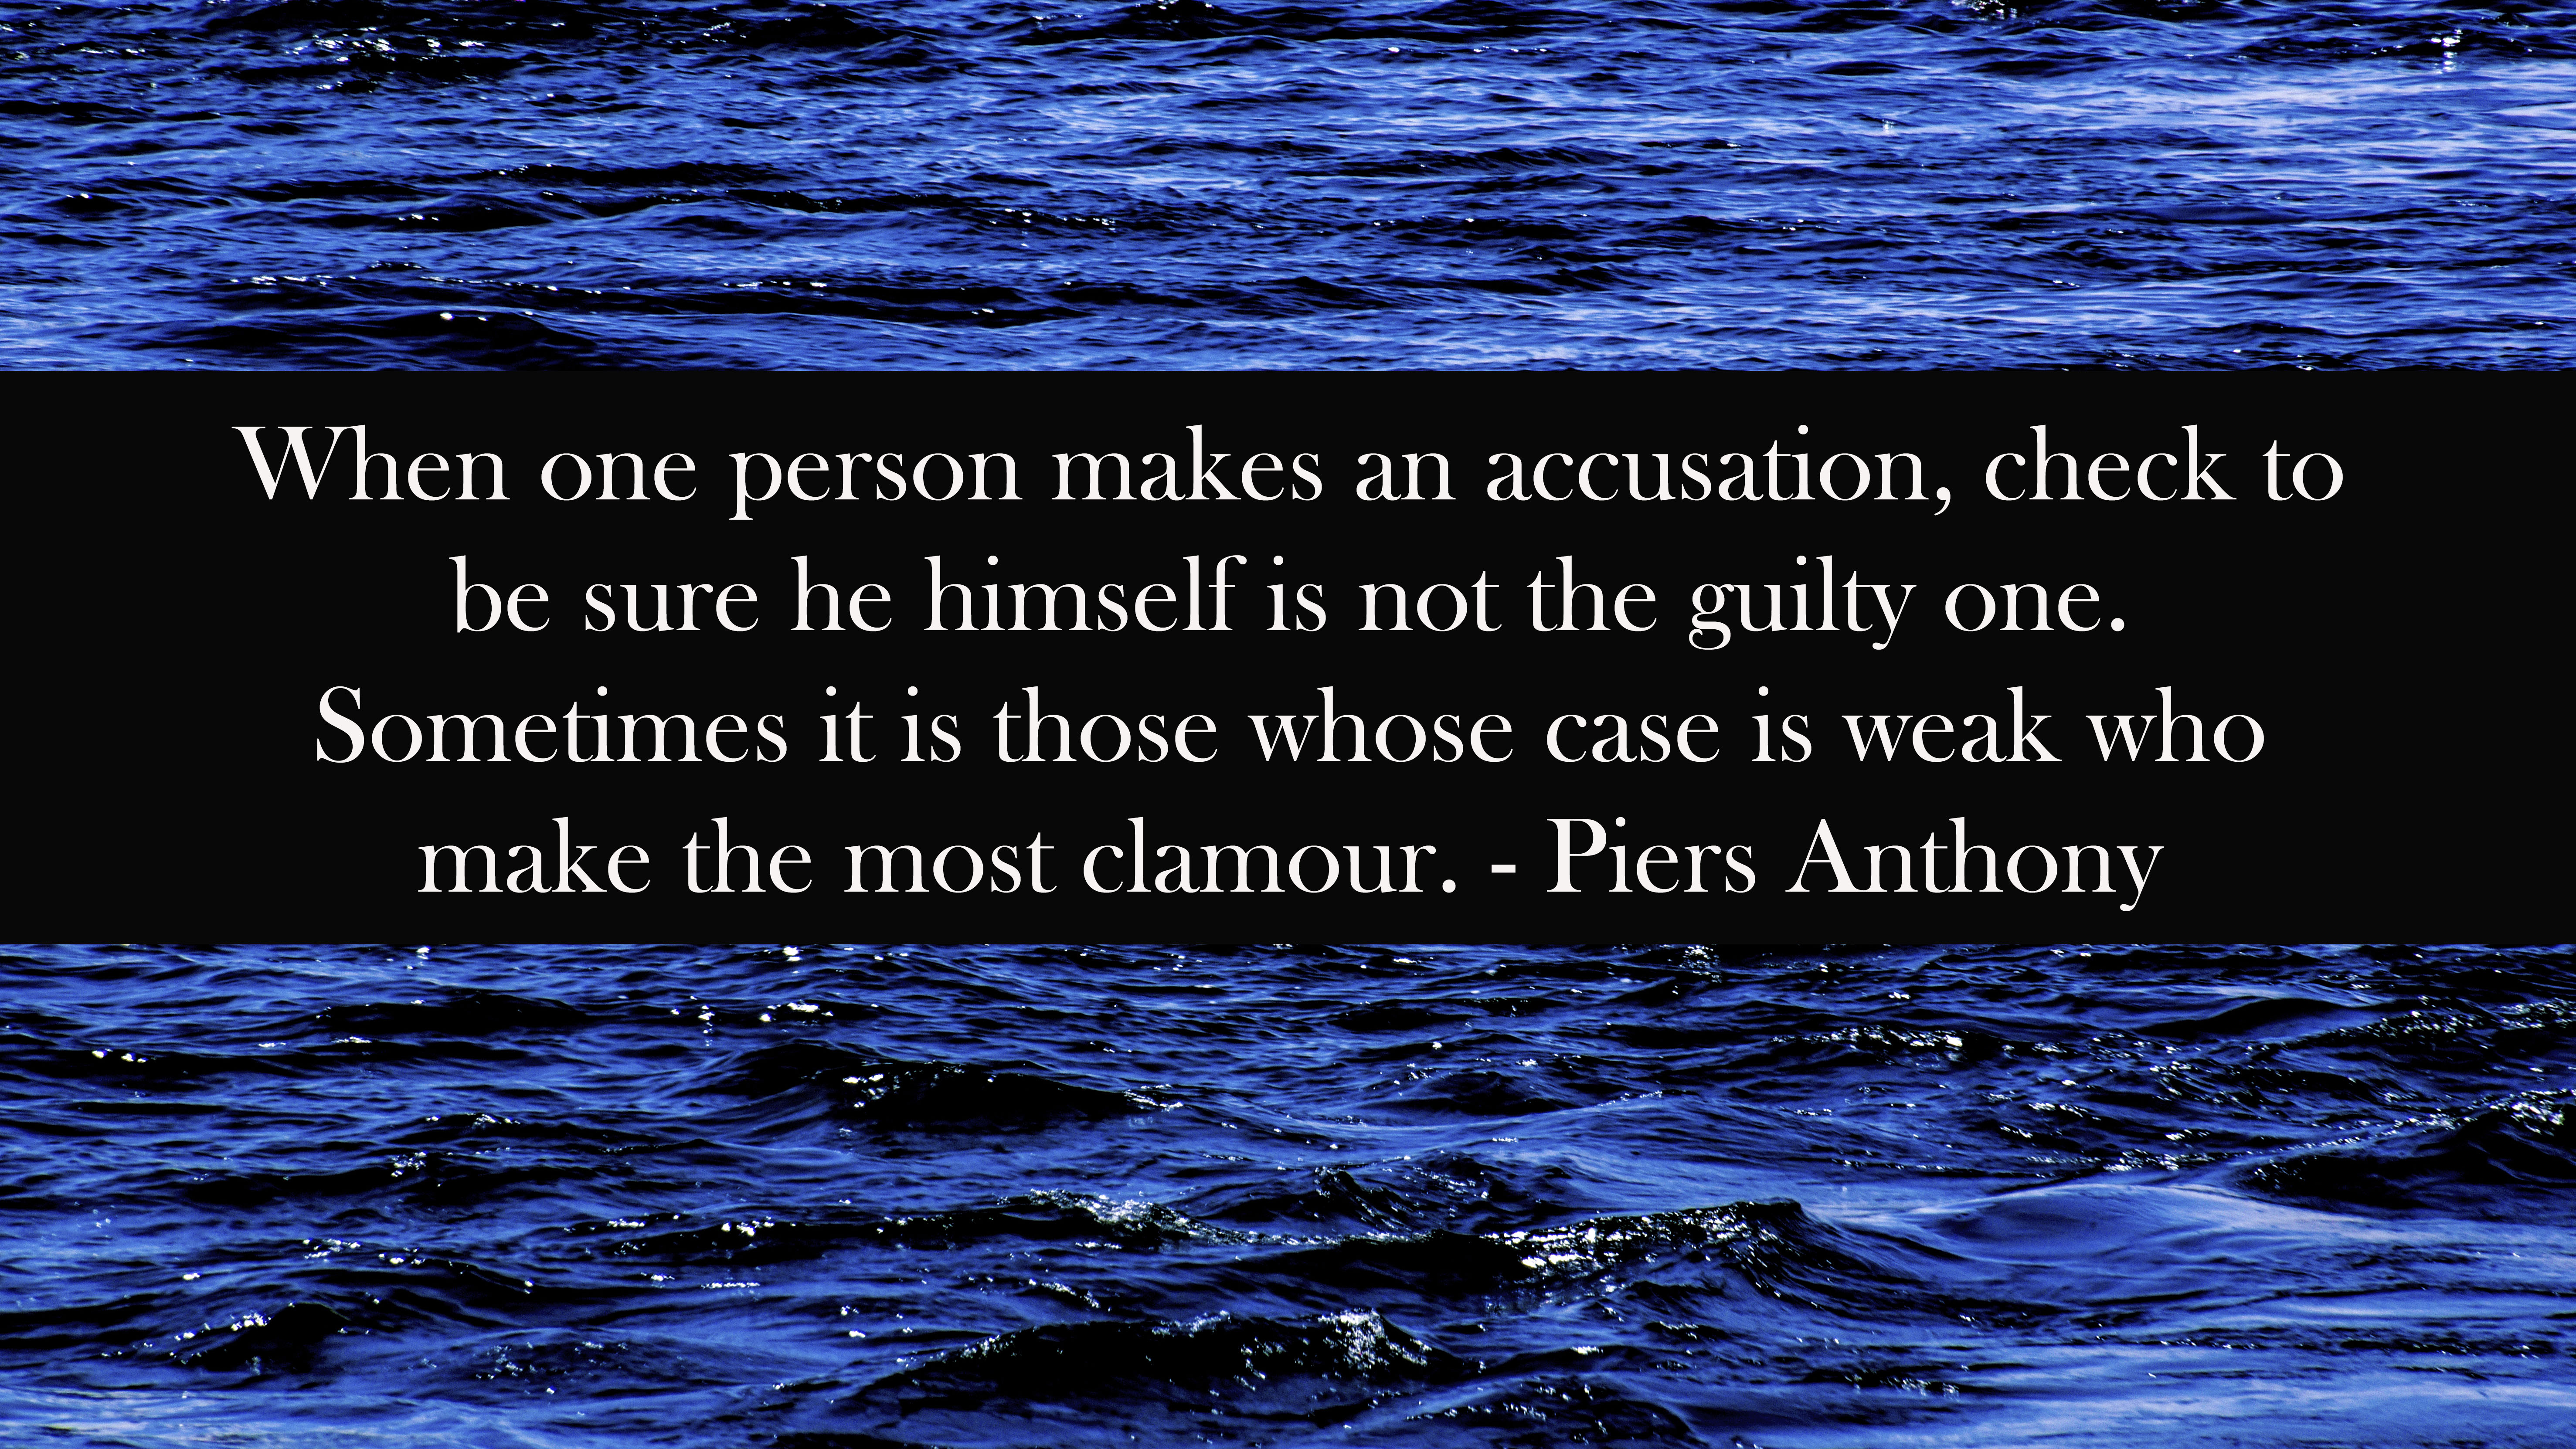 “When one person makes an accusation…”